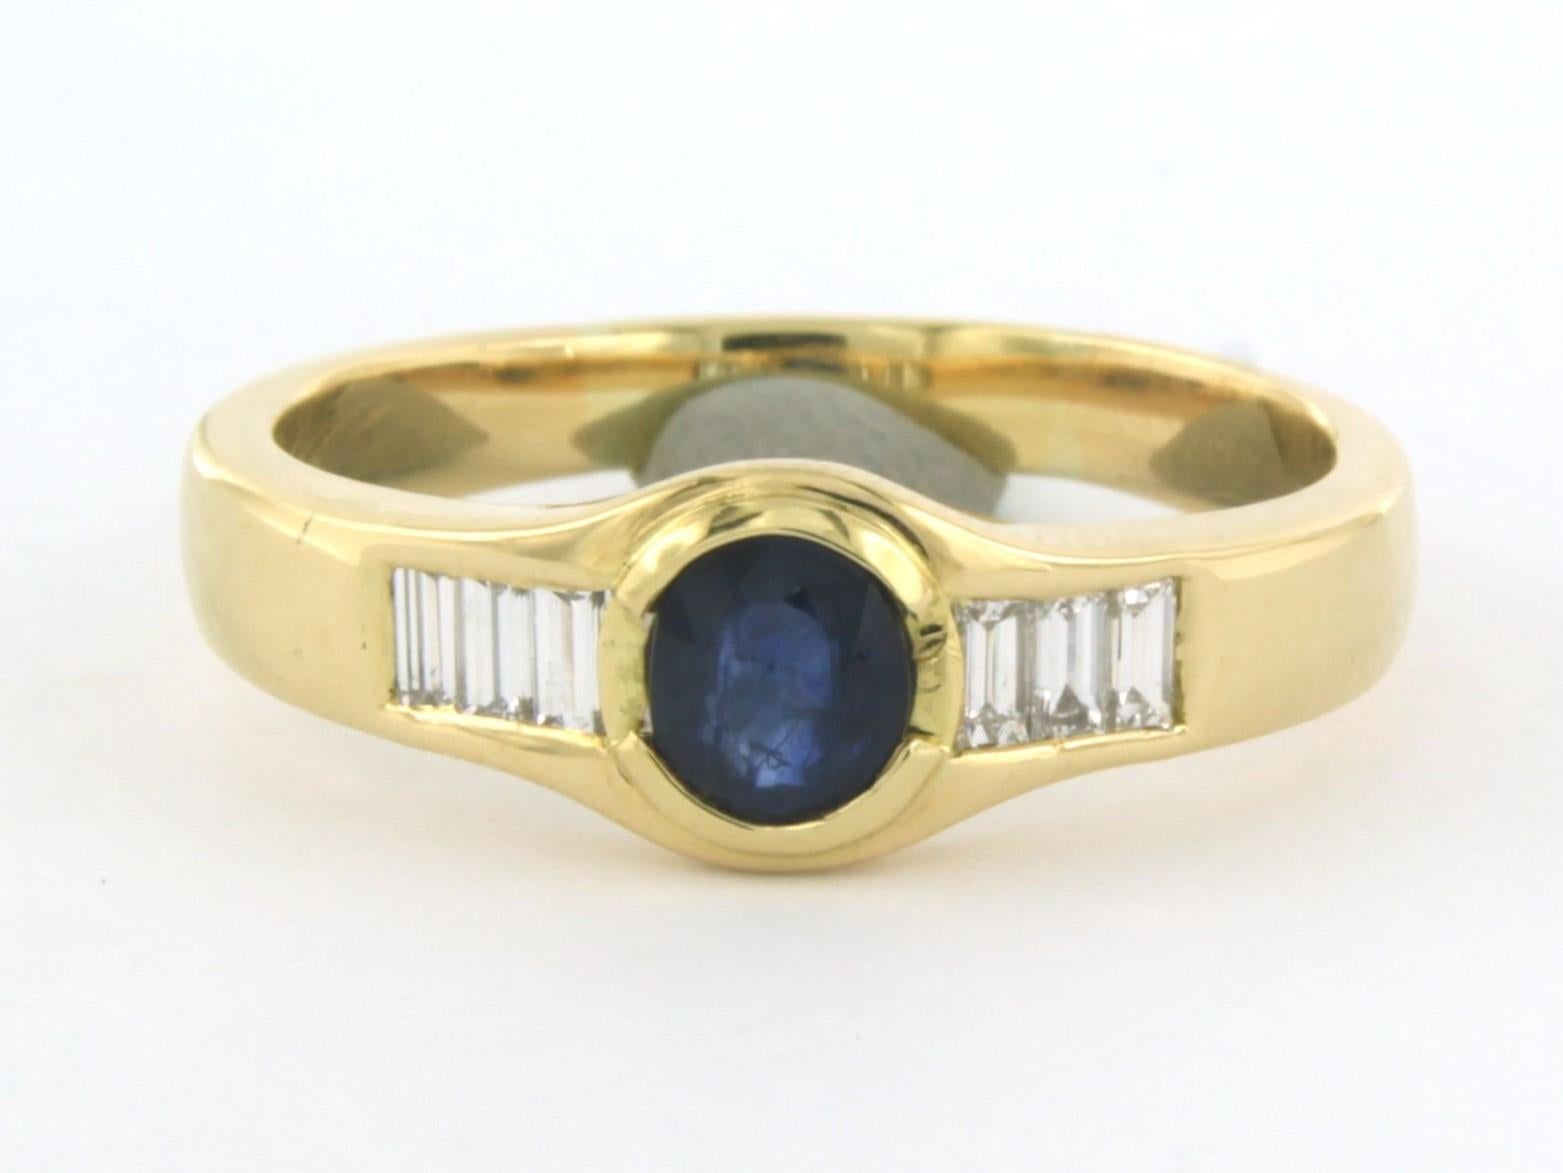 18k yellow gold ring set with sapphire 0.70 carat and baguette cut diamonds total 0.50 carat F/G VS/SI - ring size 21.25 (66)

detailed description

The front of the ring is 8.1 mm wide

Ring size : 21.25 (66)

weight : 8.0 grams

set with:

- 1 x